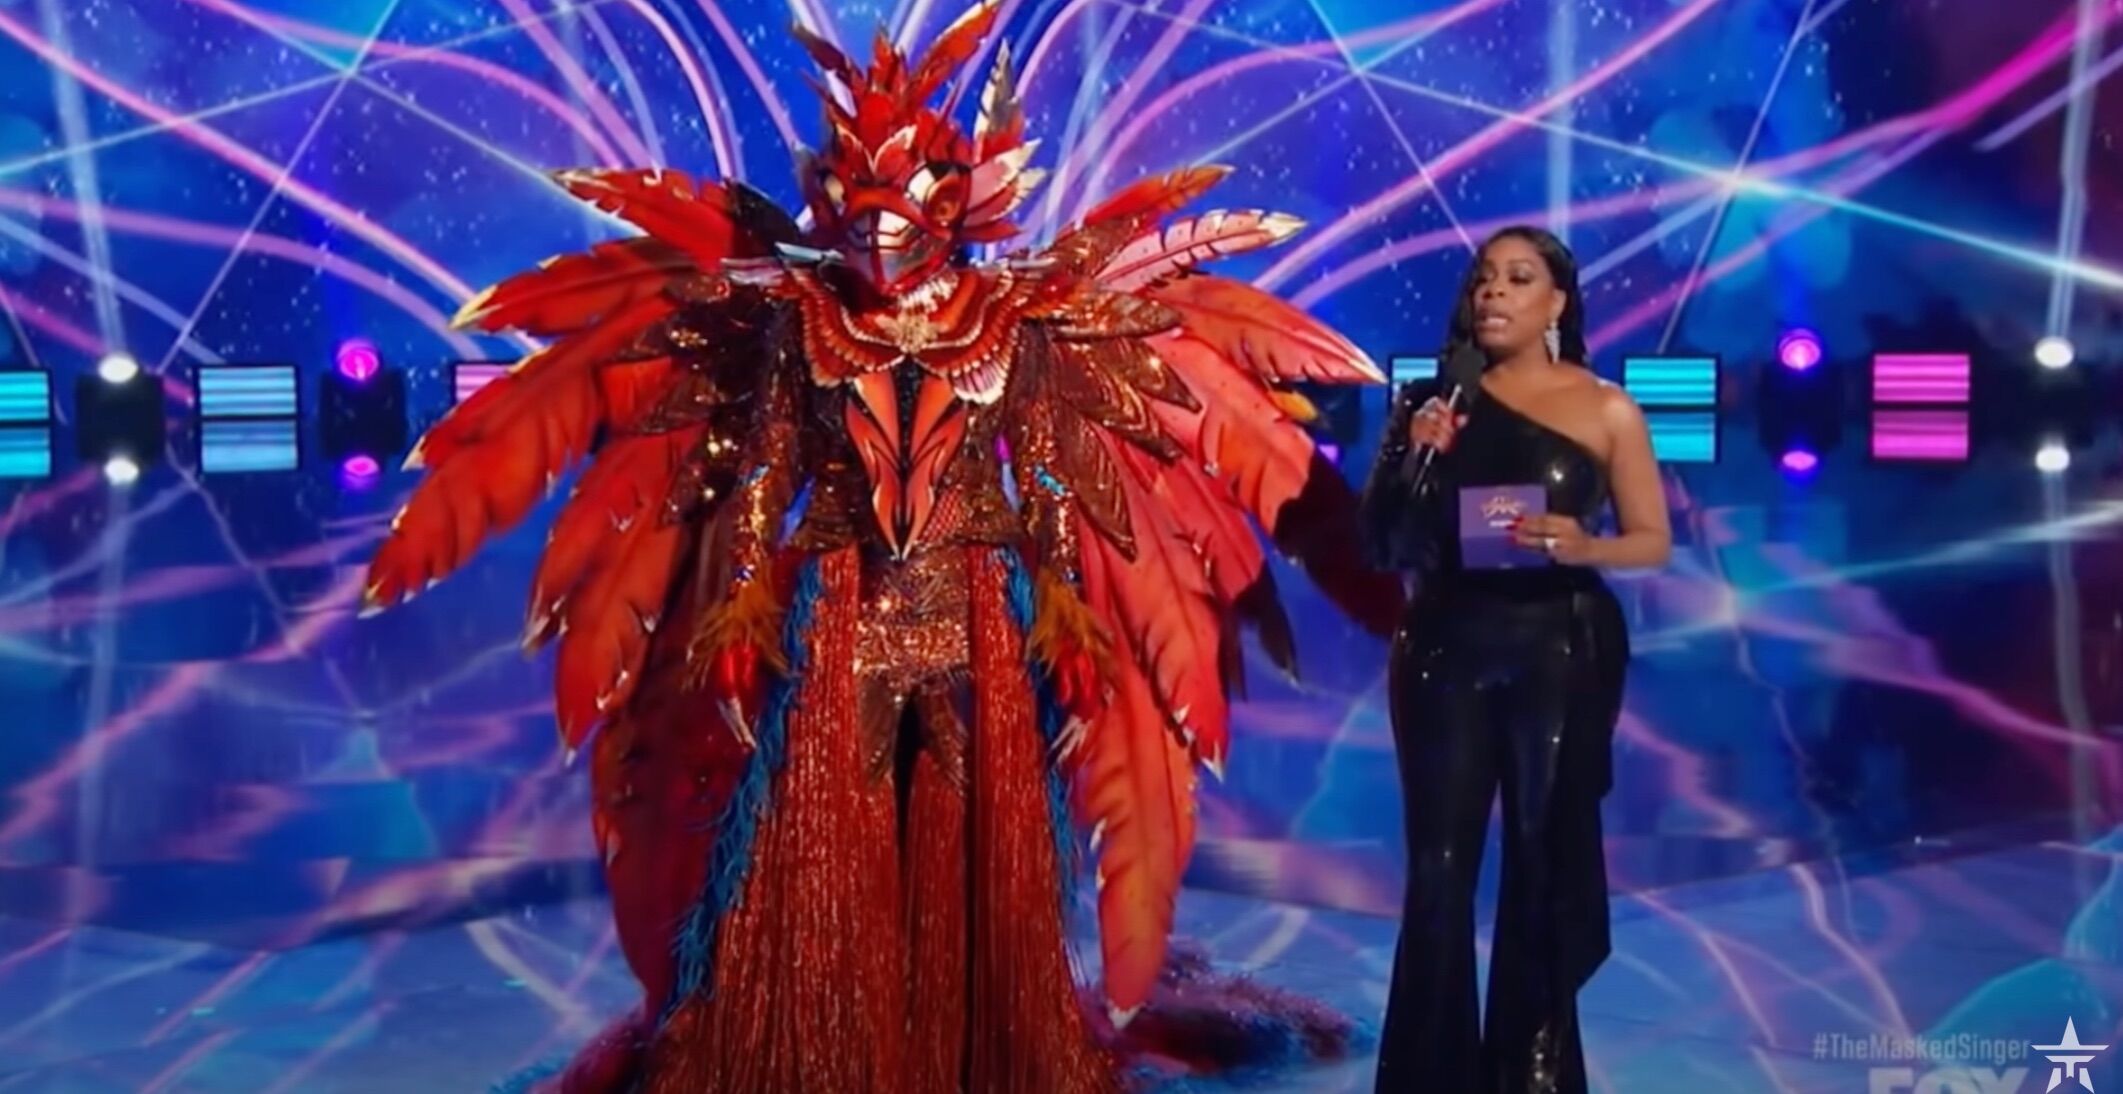 Caitlyn Jenner on the Masked Singer as Phoenix